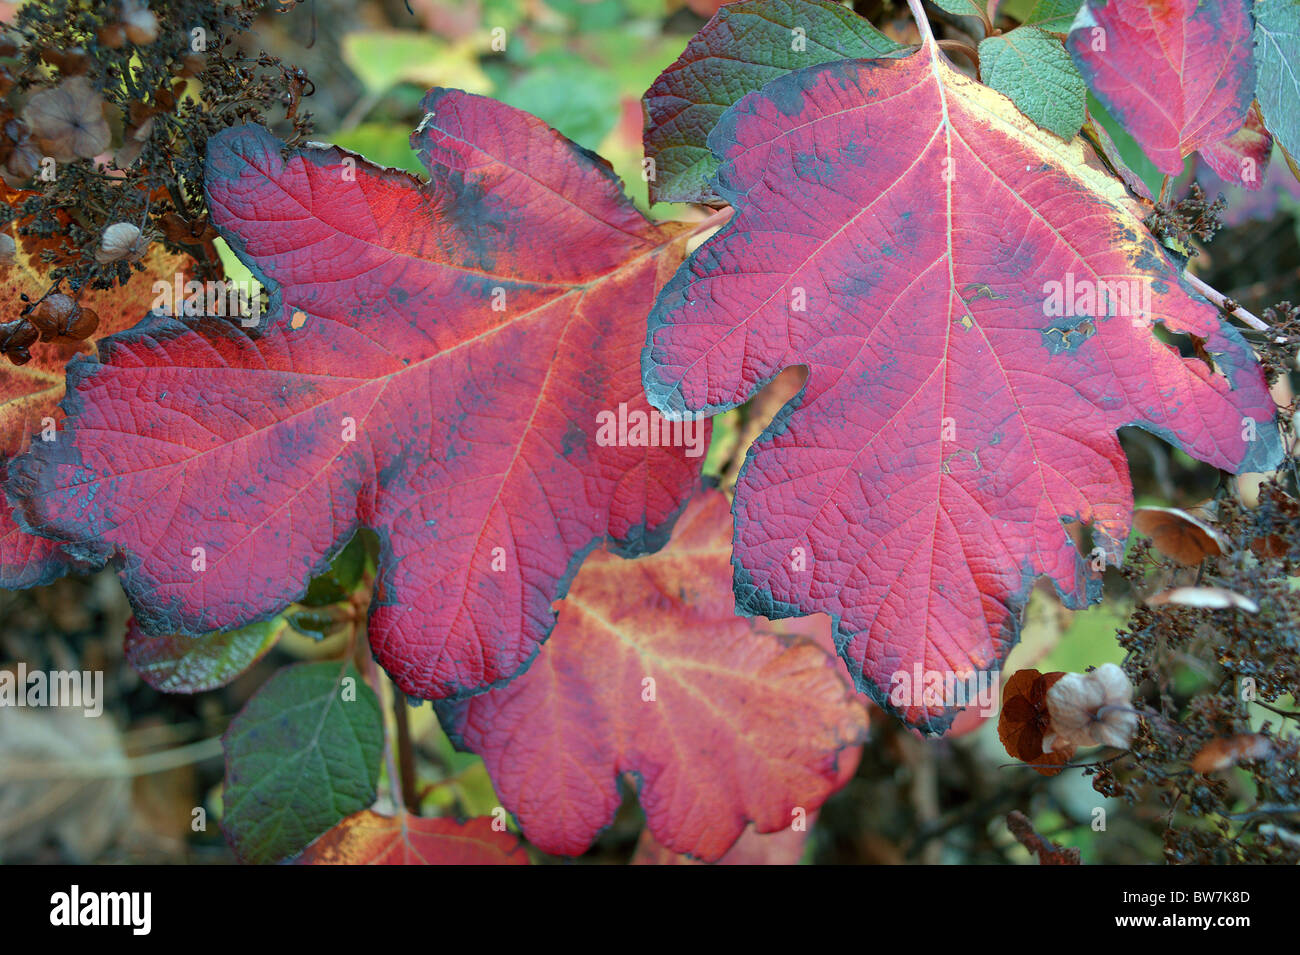 Hydrangea quercifolia red autumn leaves close up Stock Photo